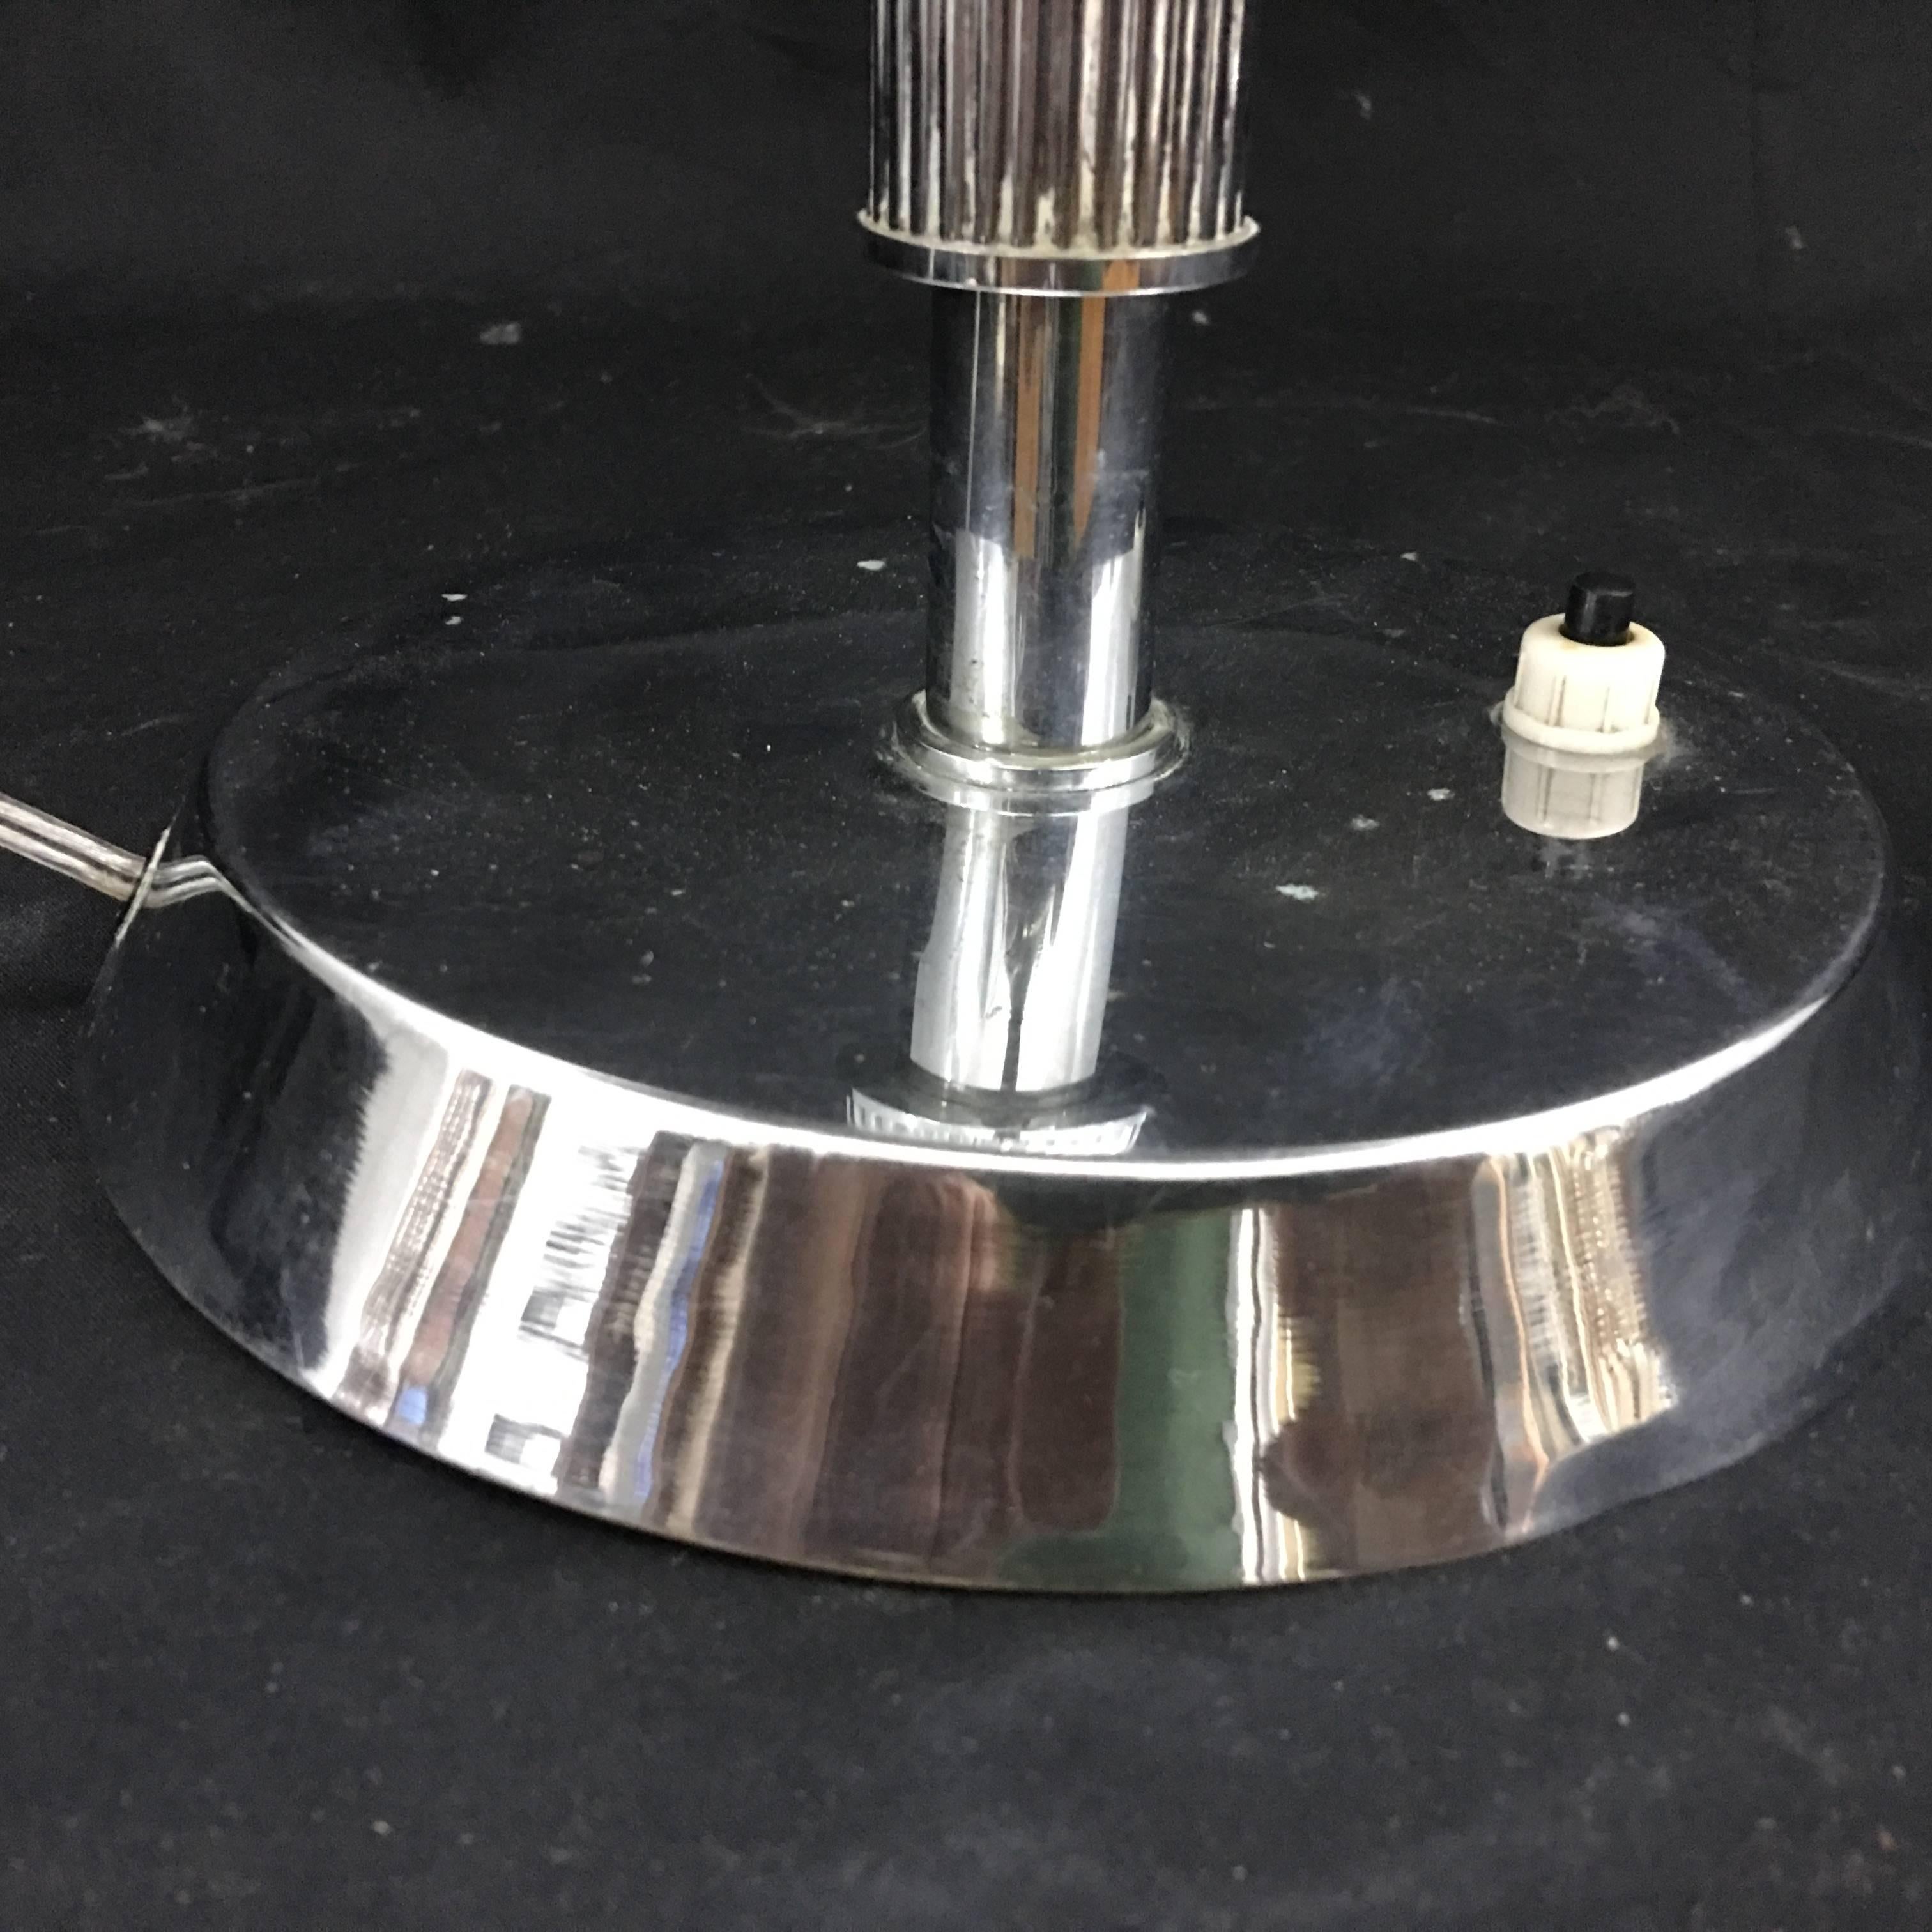 Steel and chrome table lamp, made in Italy in the 1930s, electrical parts fully restored, some small defects in the lamp hat.